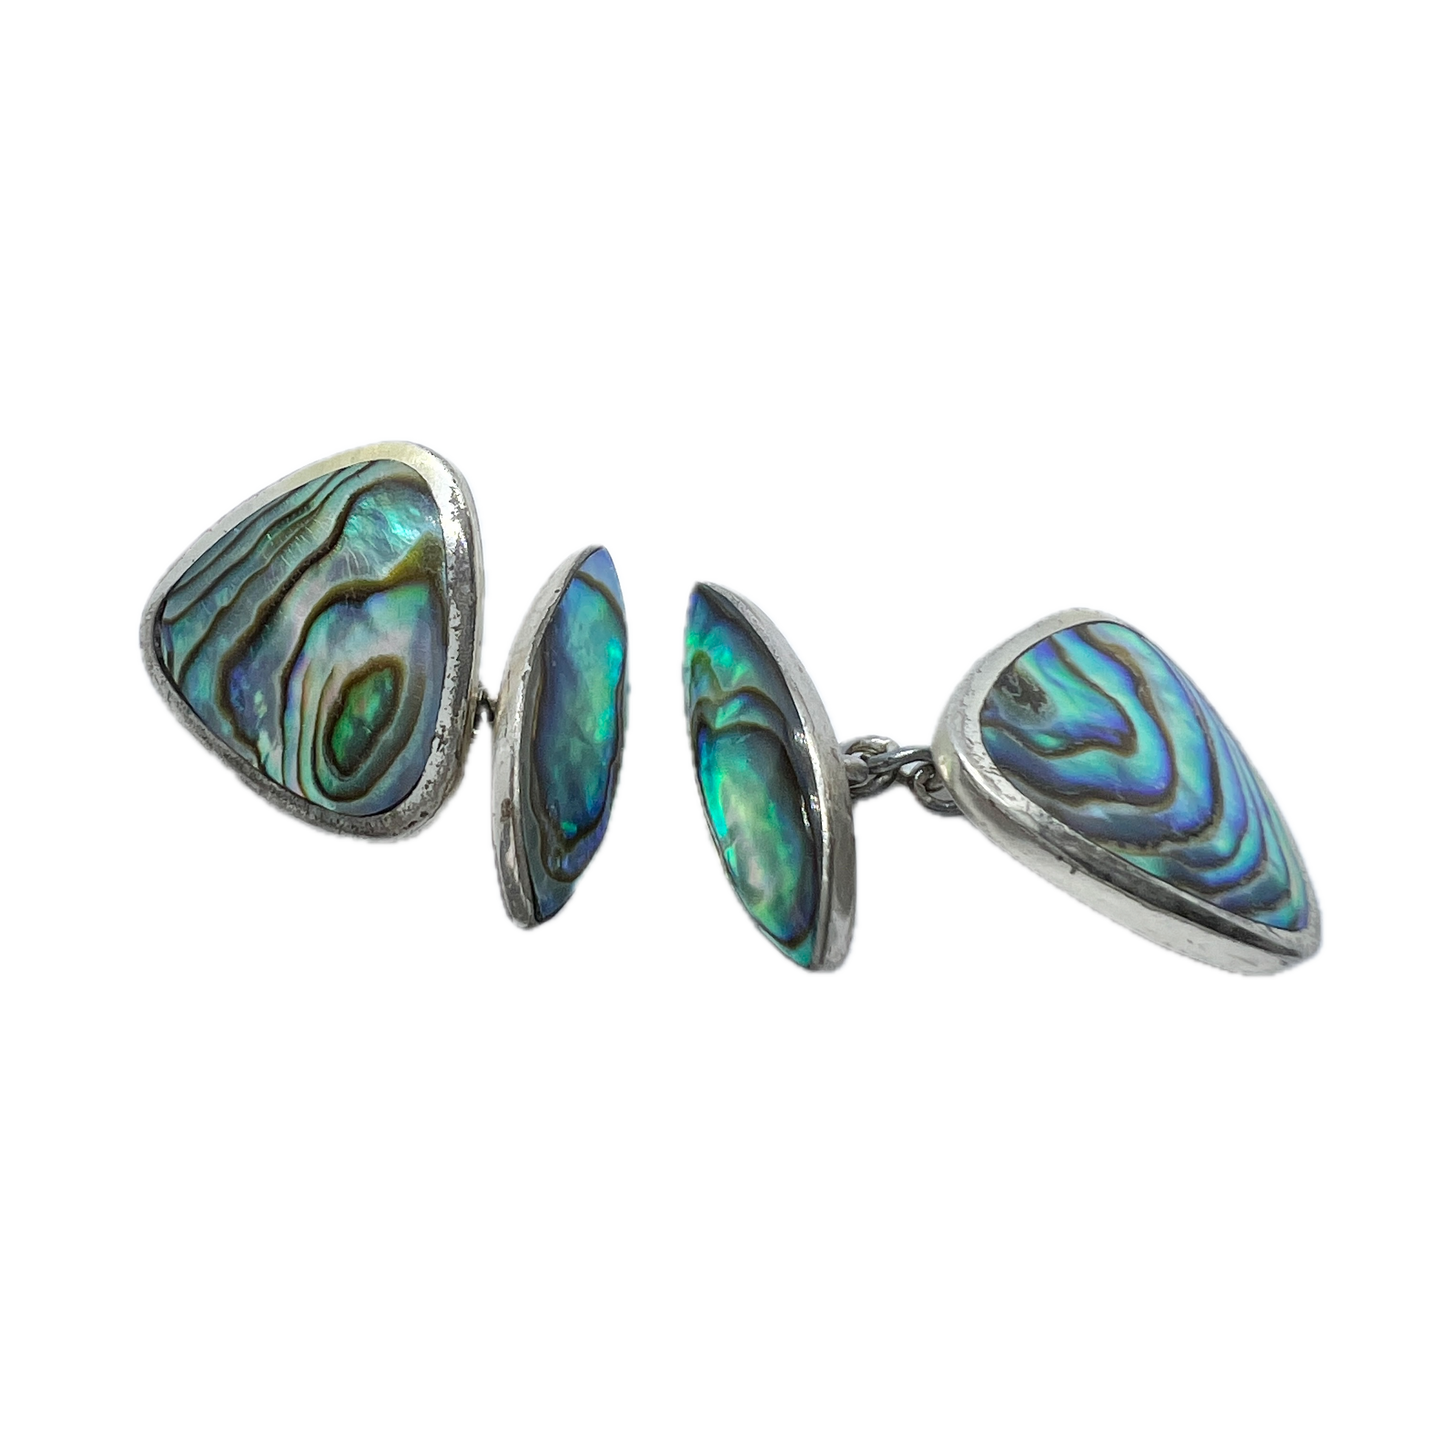 Ataahua Sterling, New Zealand. Vintage Sterling Silver Abalone Cufflinks.